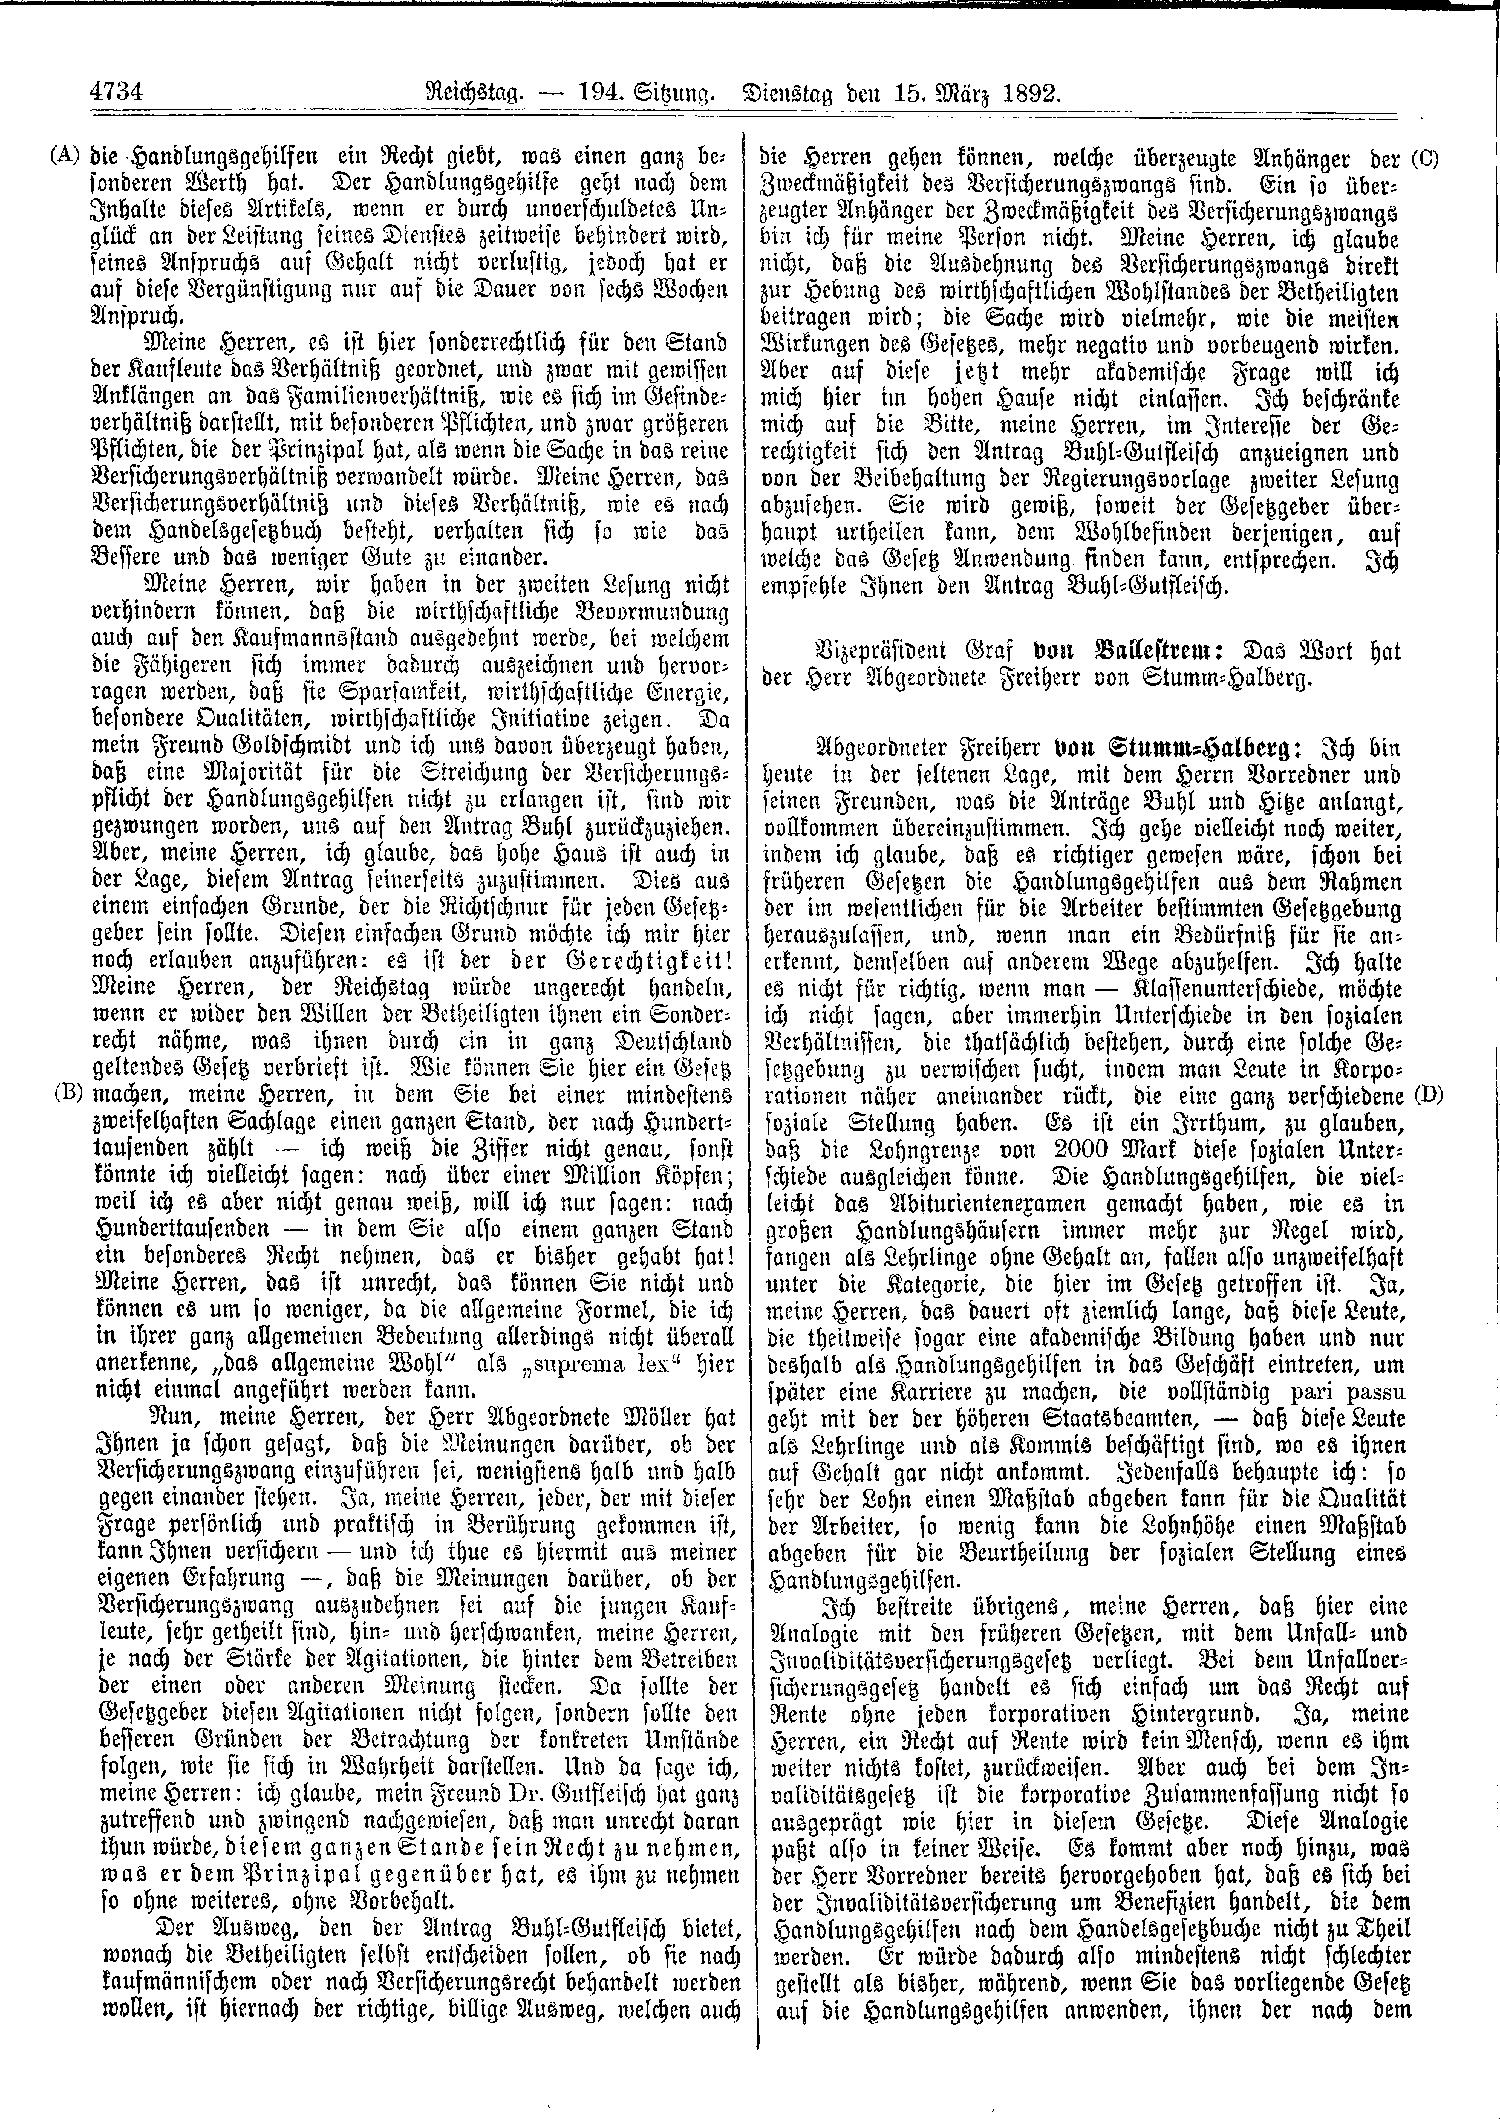 Scan of page 4734